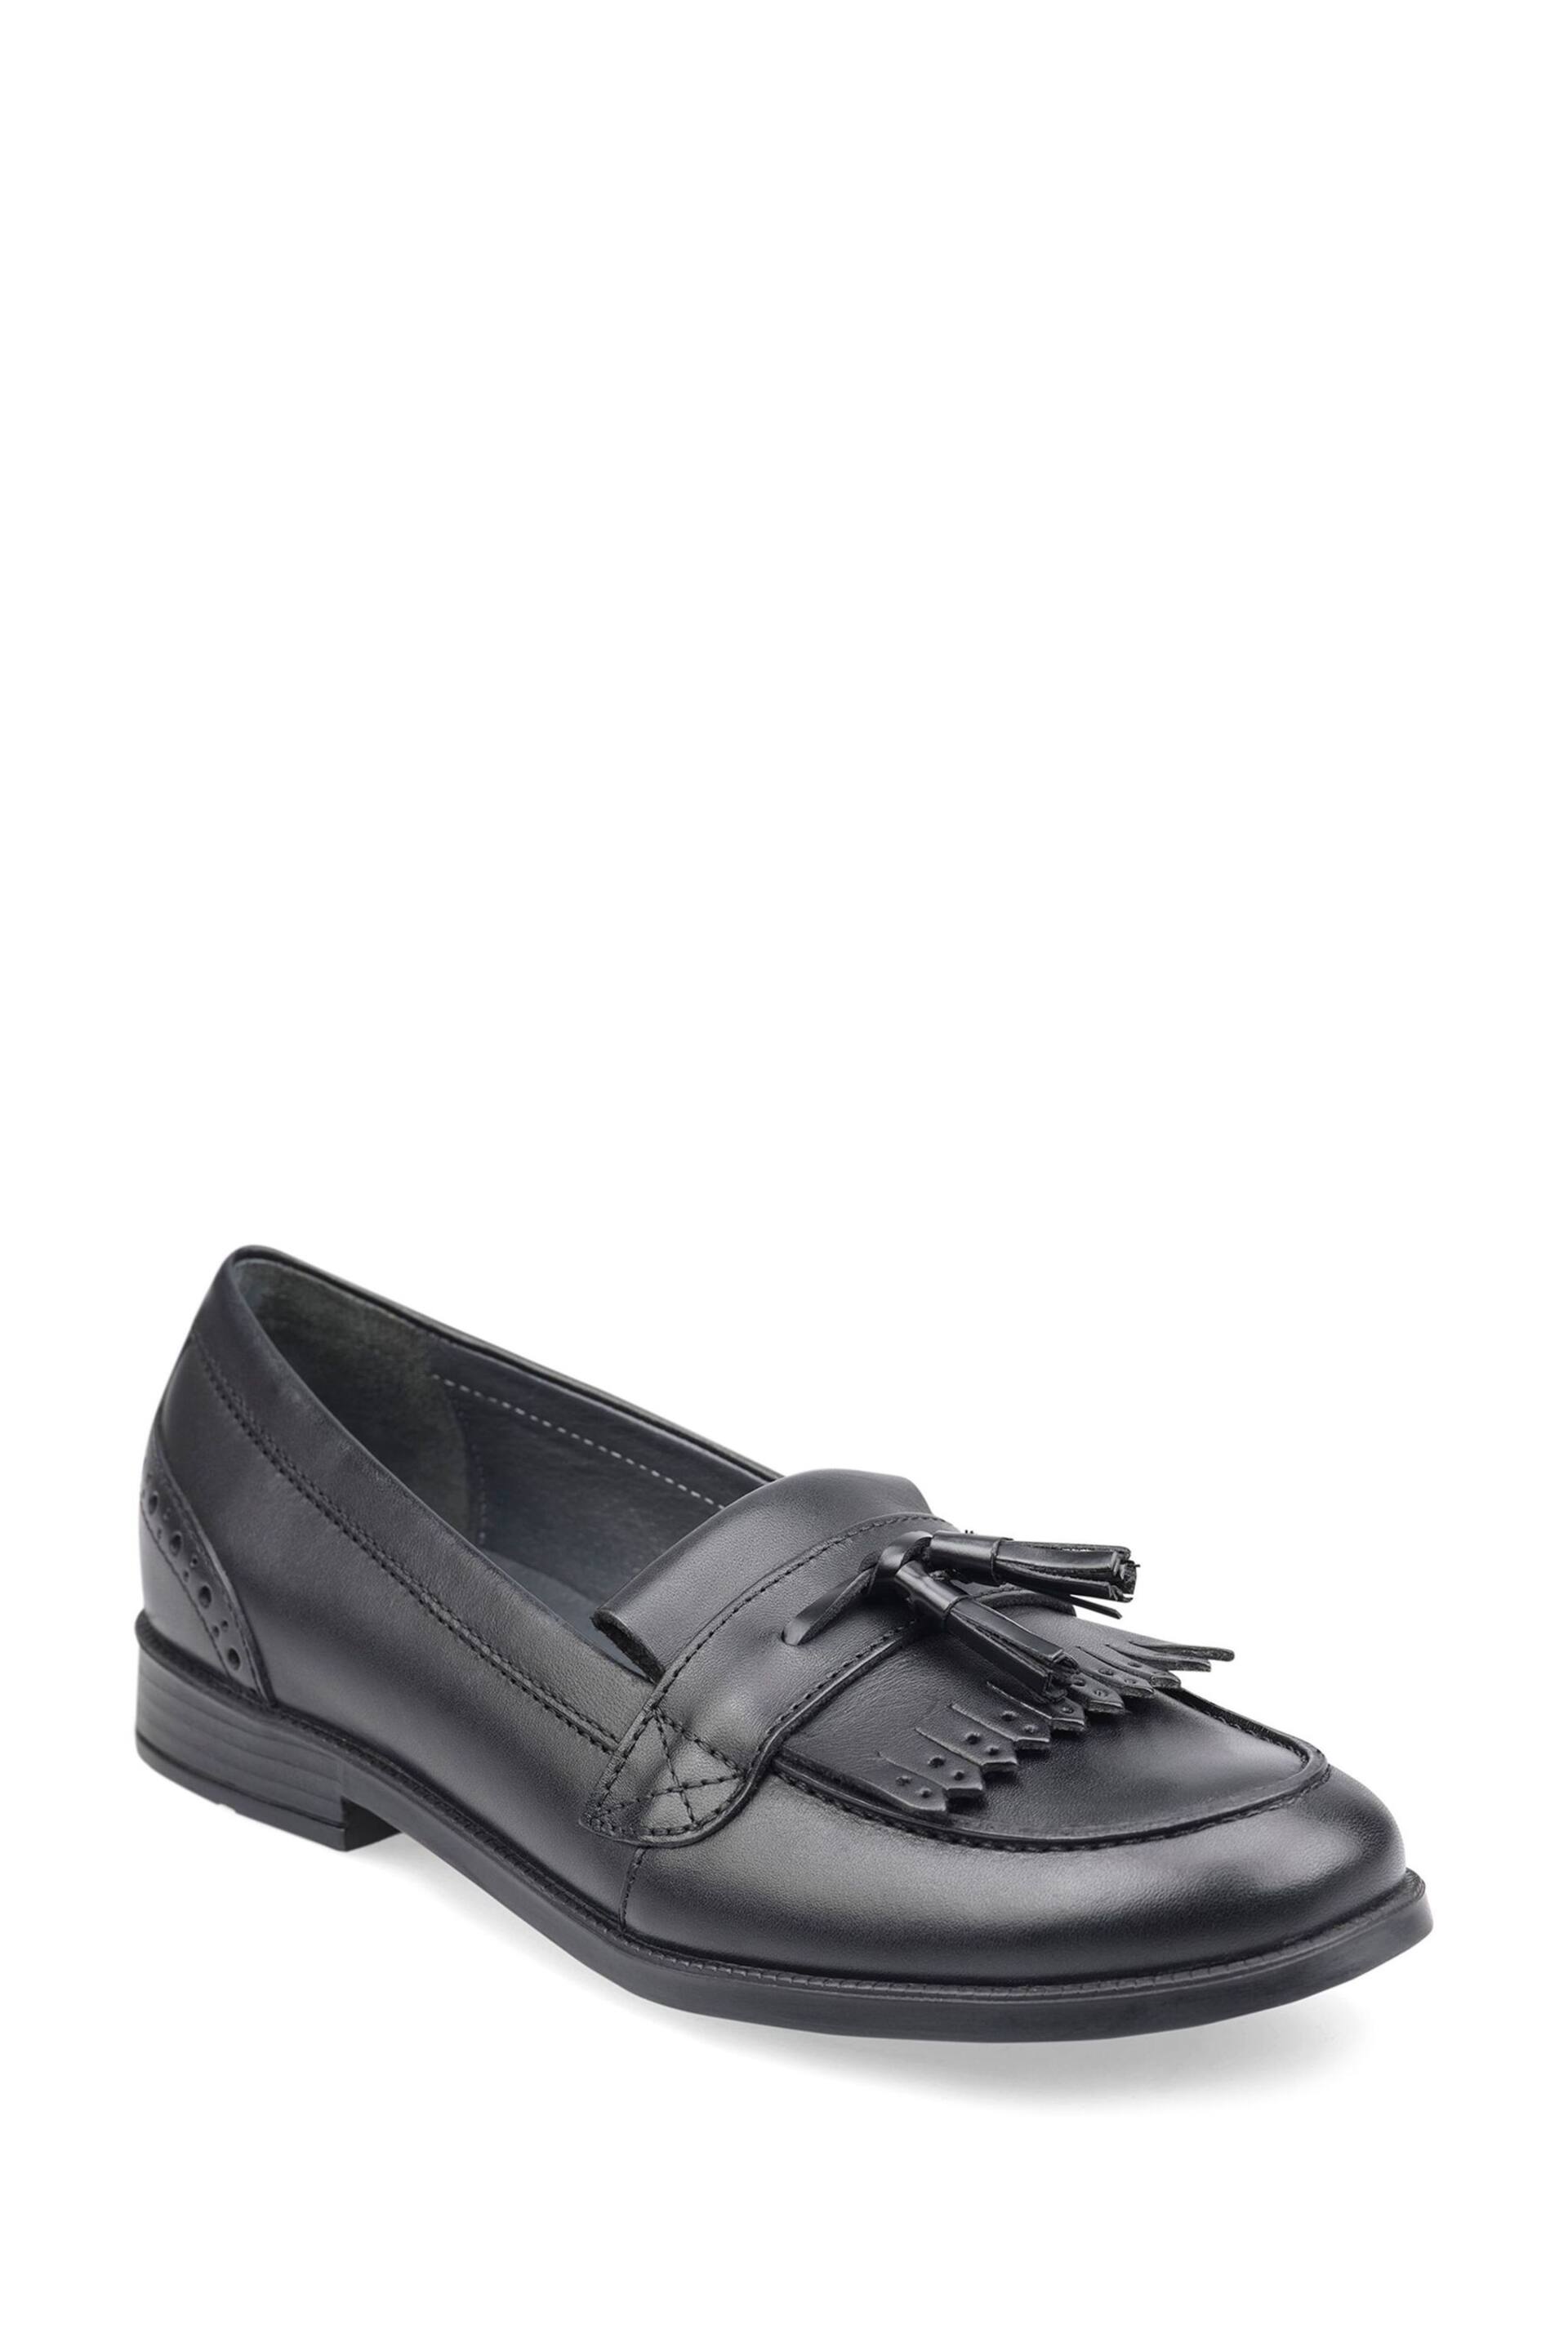 Start-Rite Sketch Slip On Black Patent Leather School Shoes Wide Fit - Image 3 of 5